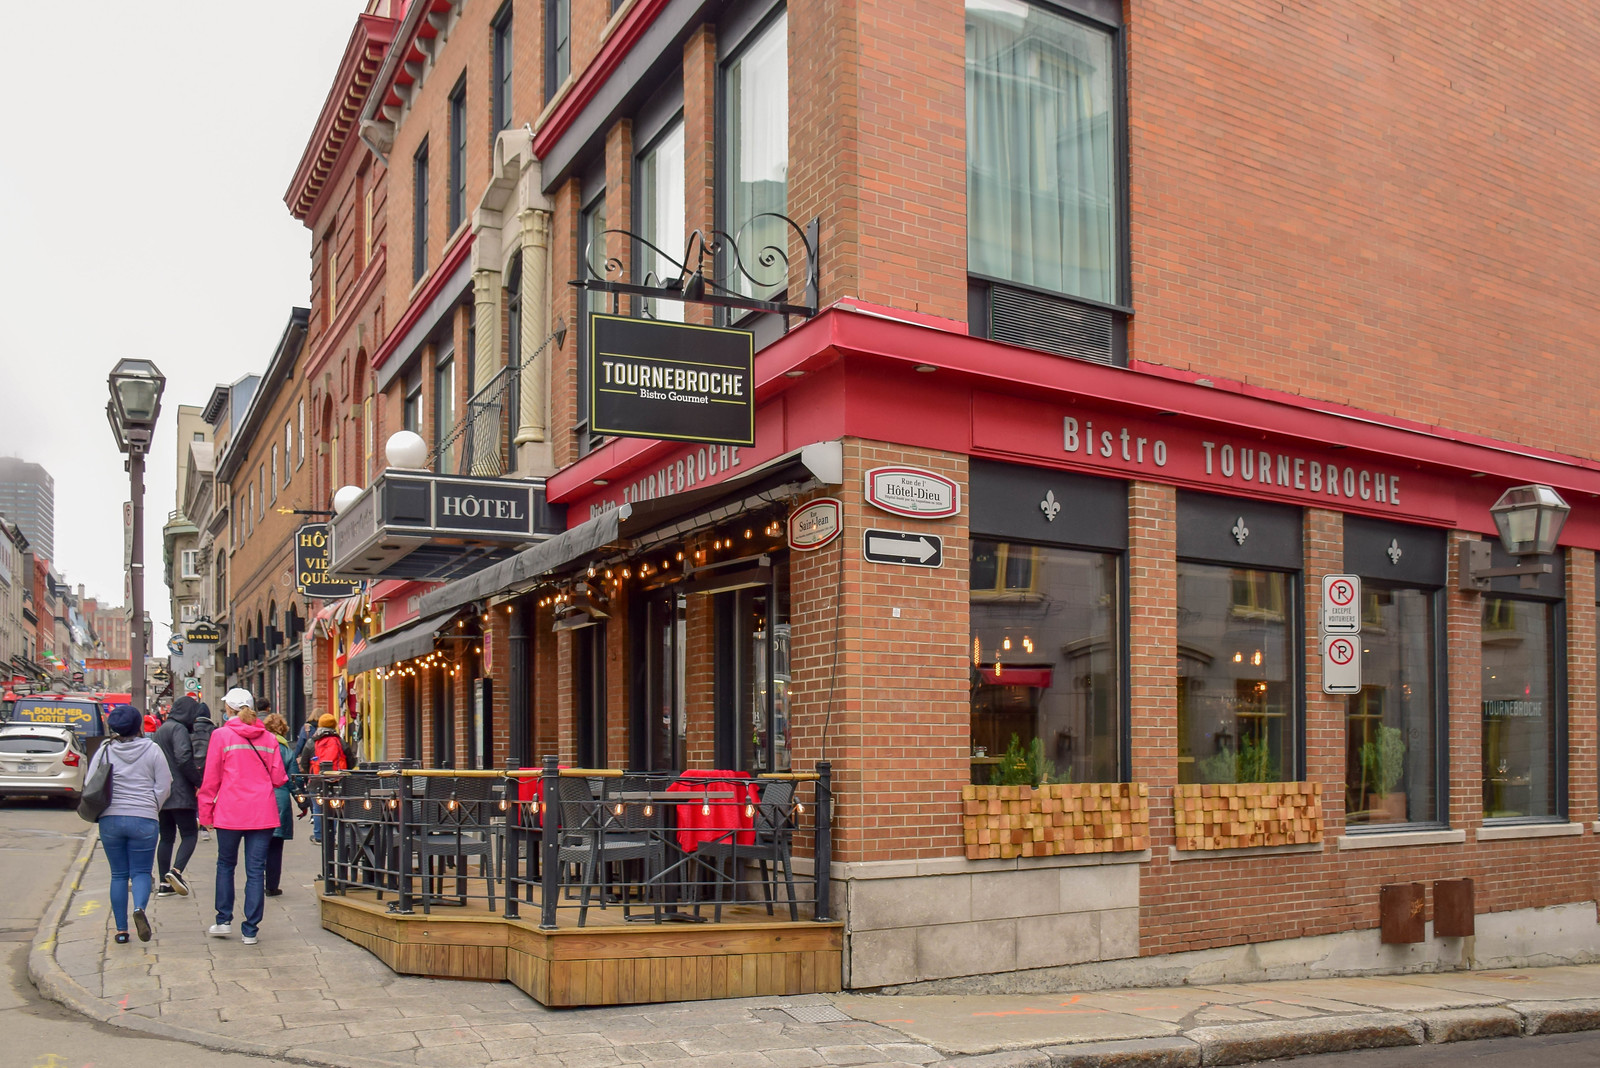 Bistro Tournebroche and hotel on a street corner in St. Jean, in Quebec City, Canada